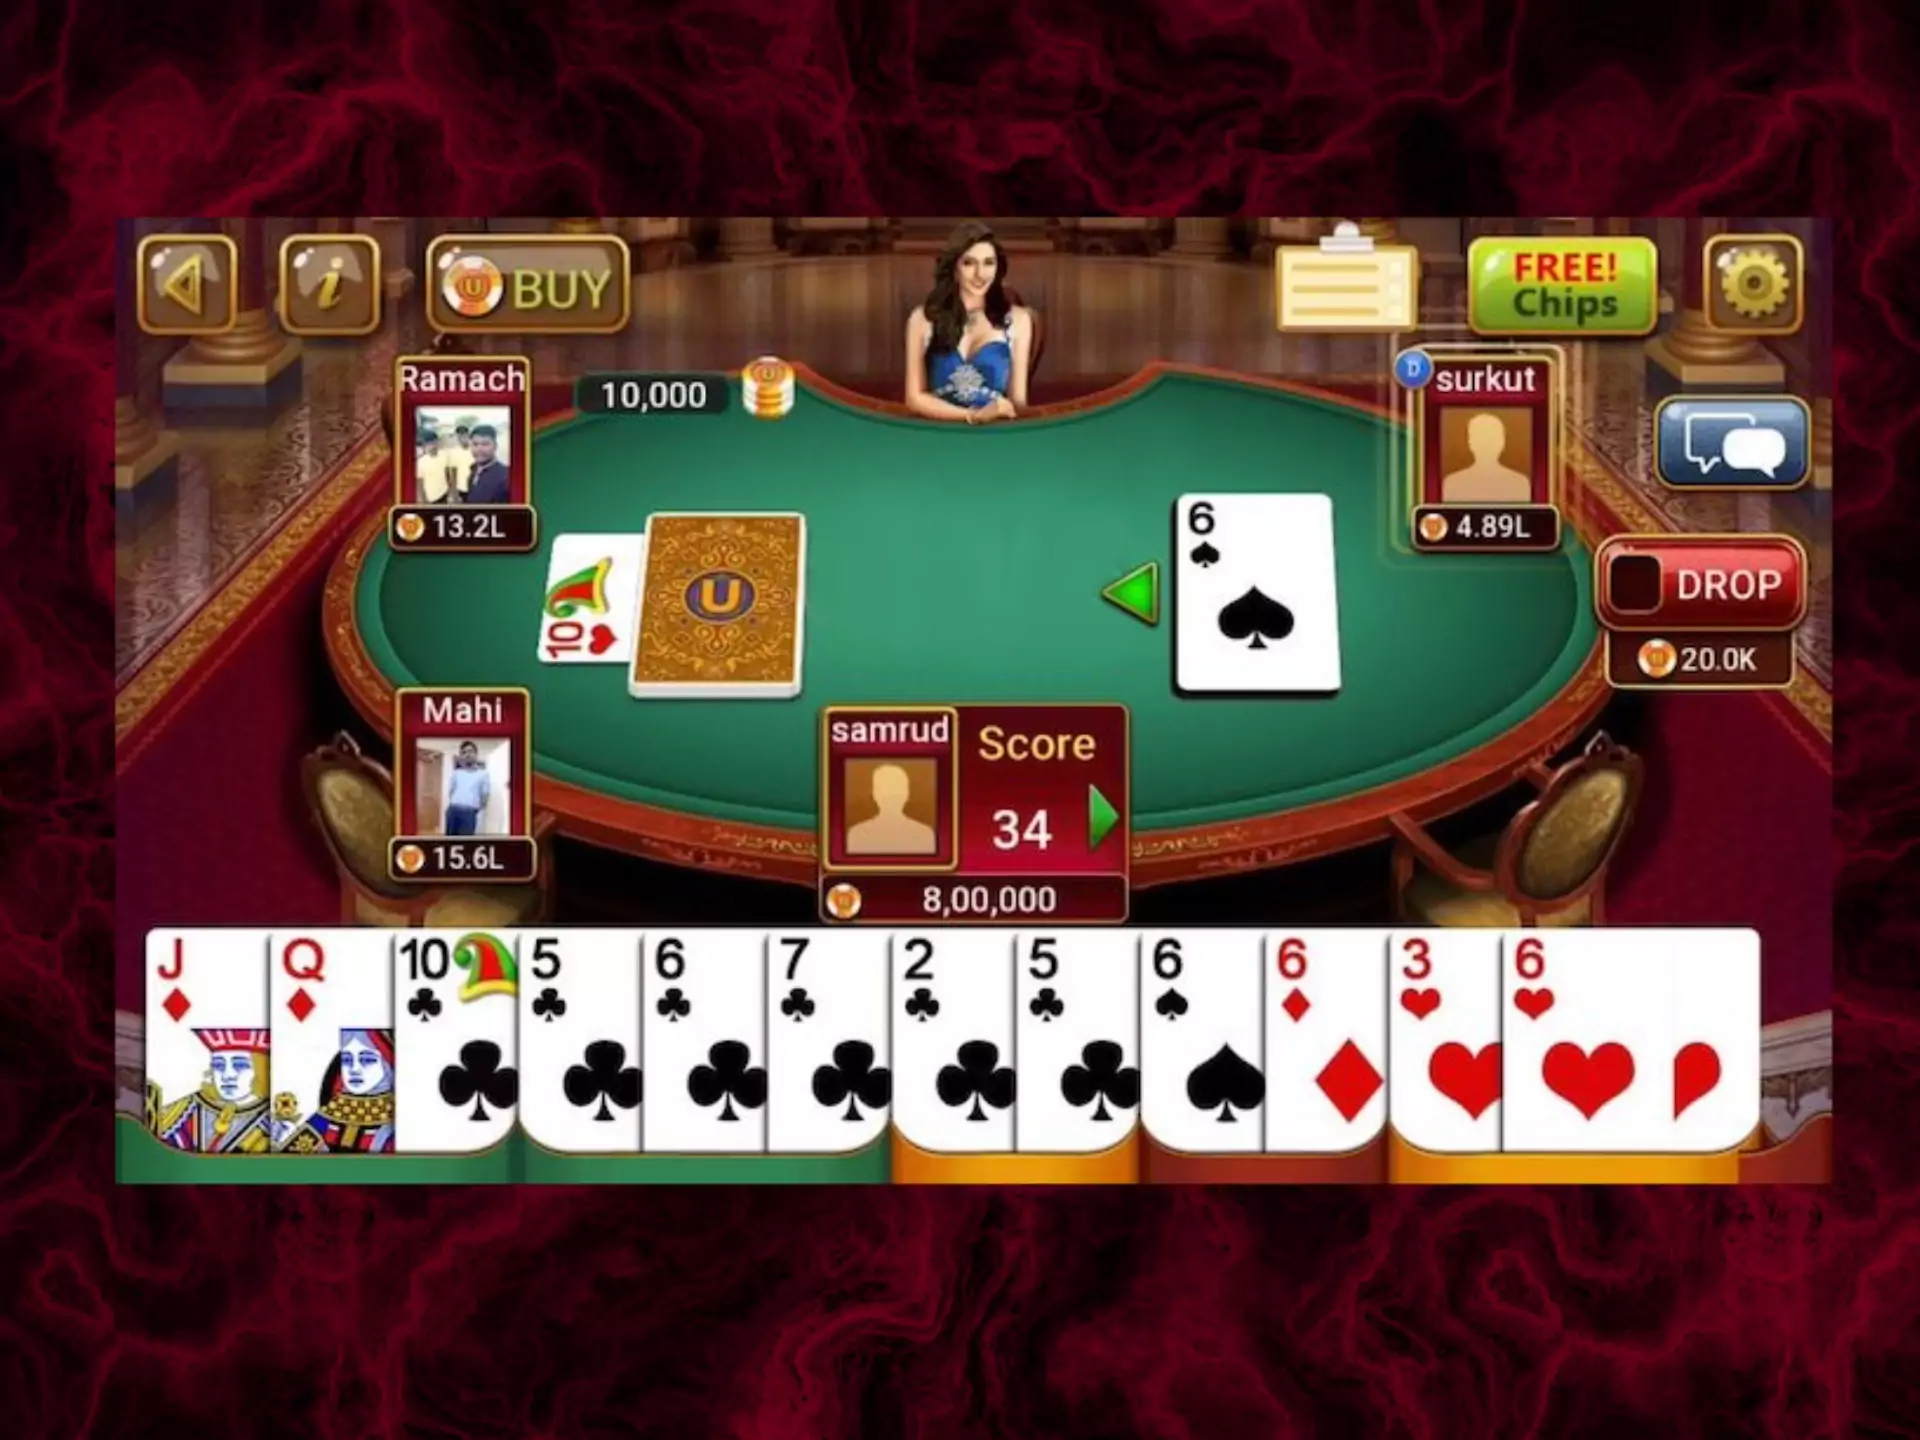 Choose this type of rummy if you want to play the original Indian game.